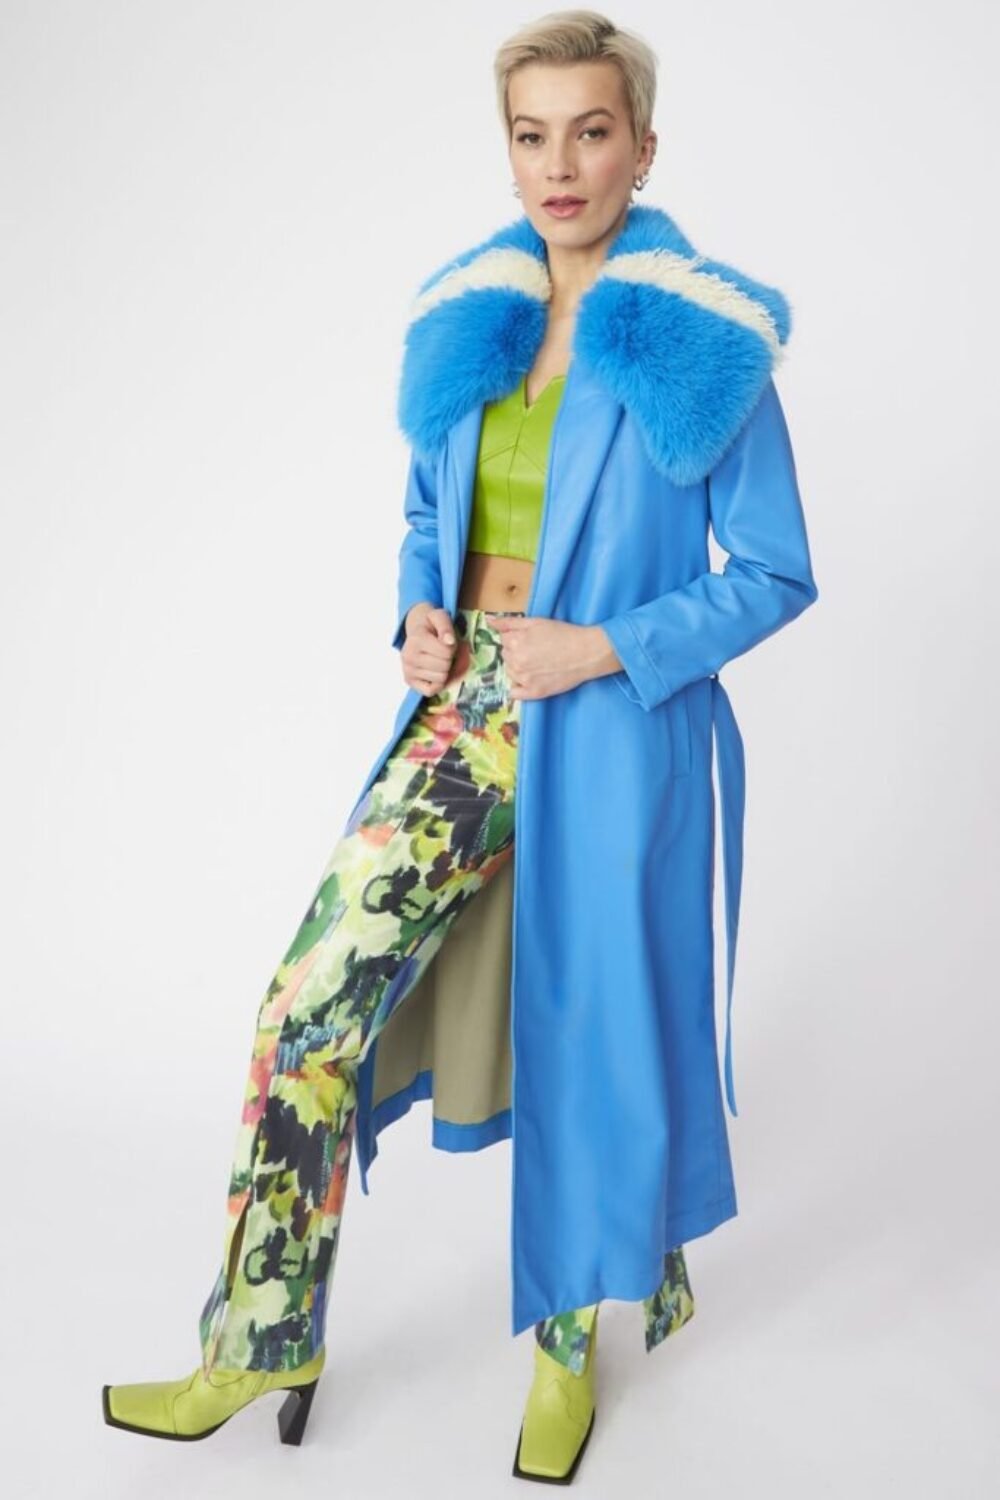 Shop Lux Blue Tencel Blend Eco Leather Trench Coat and women's luxury and designer clothes at www.lux-apparel.co.uk